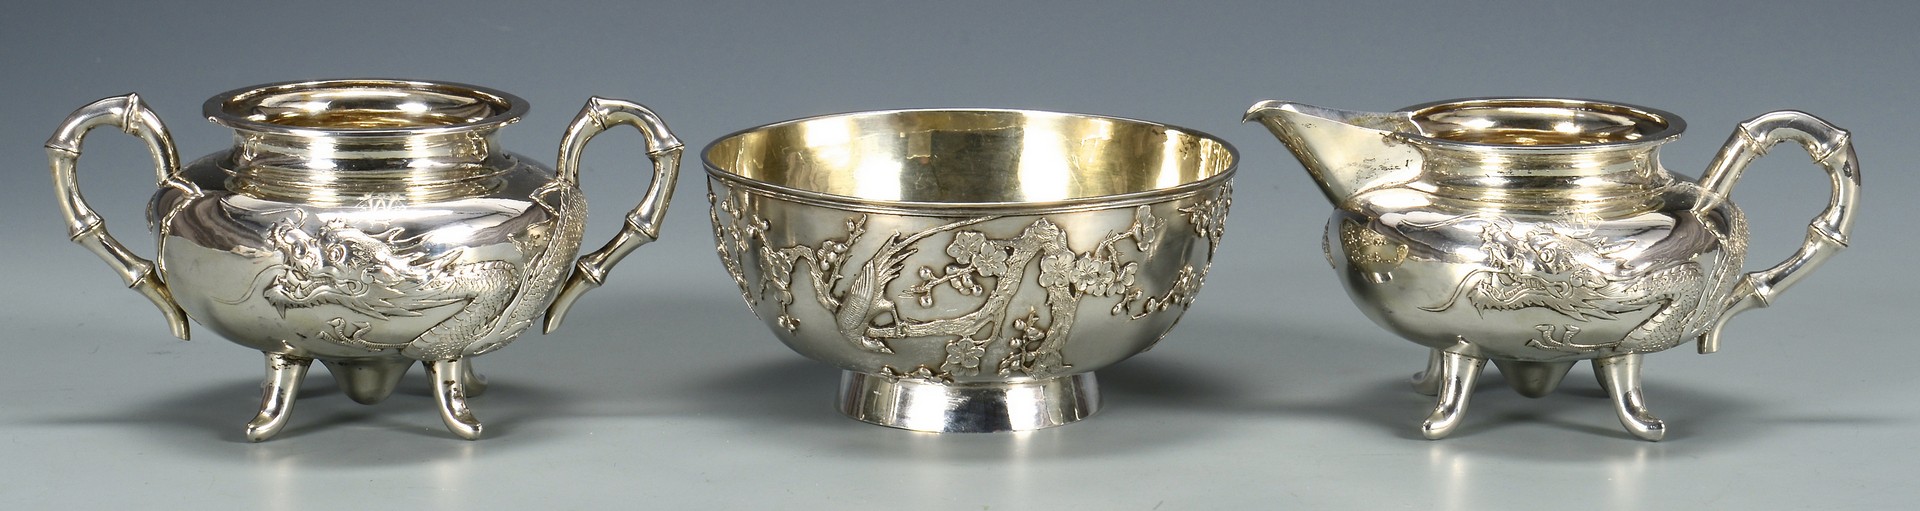 Lot 34: Chinese Export Silver Tea Service and Tray